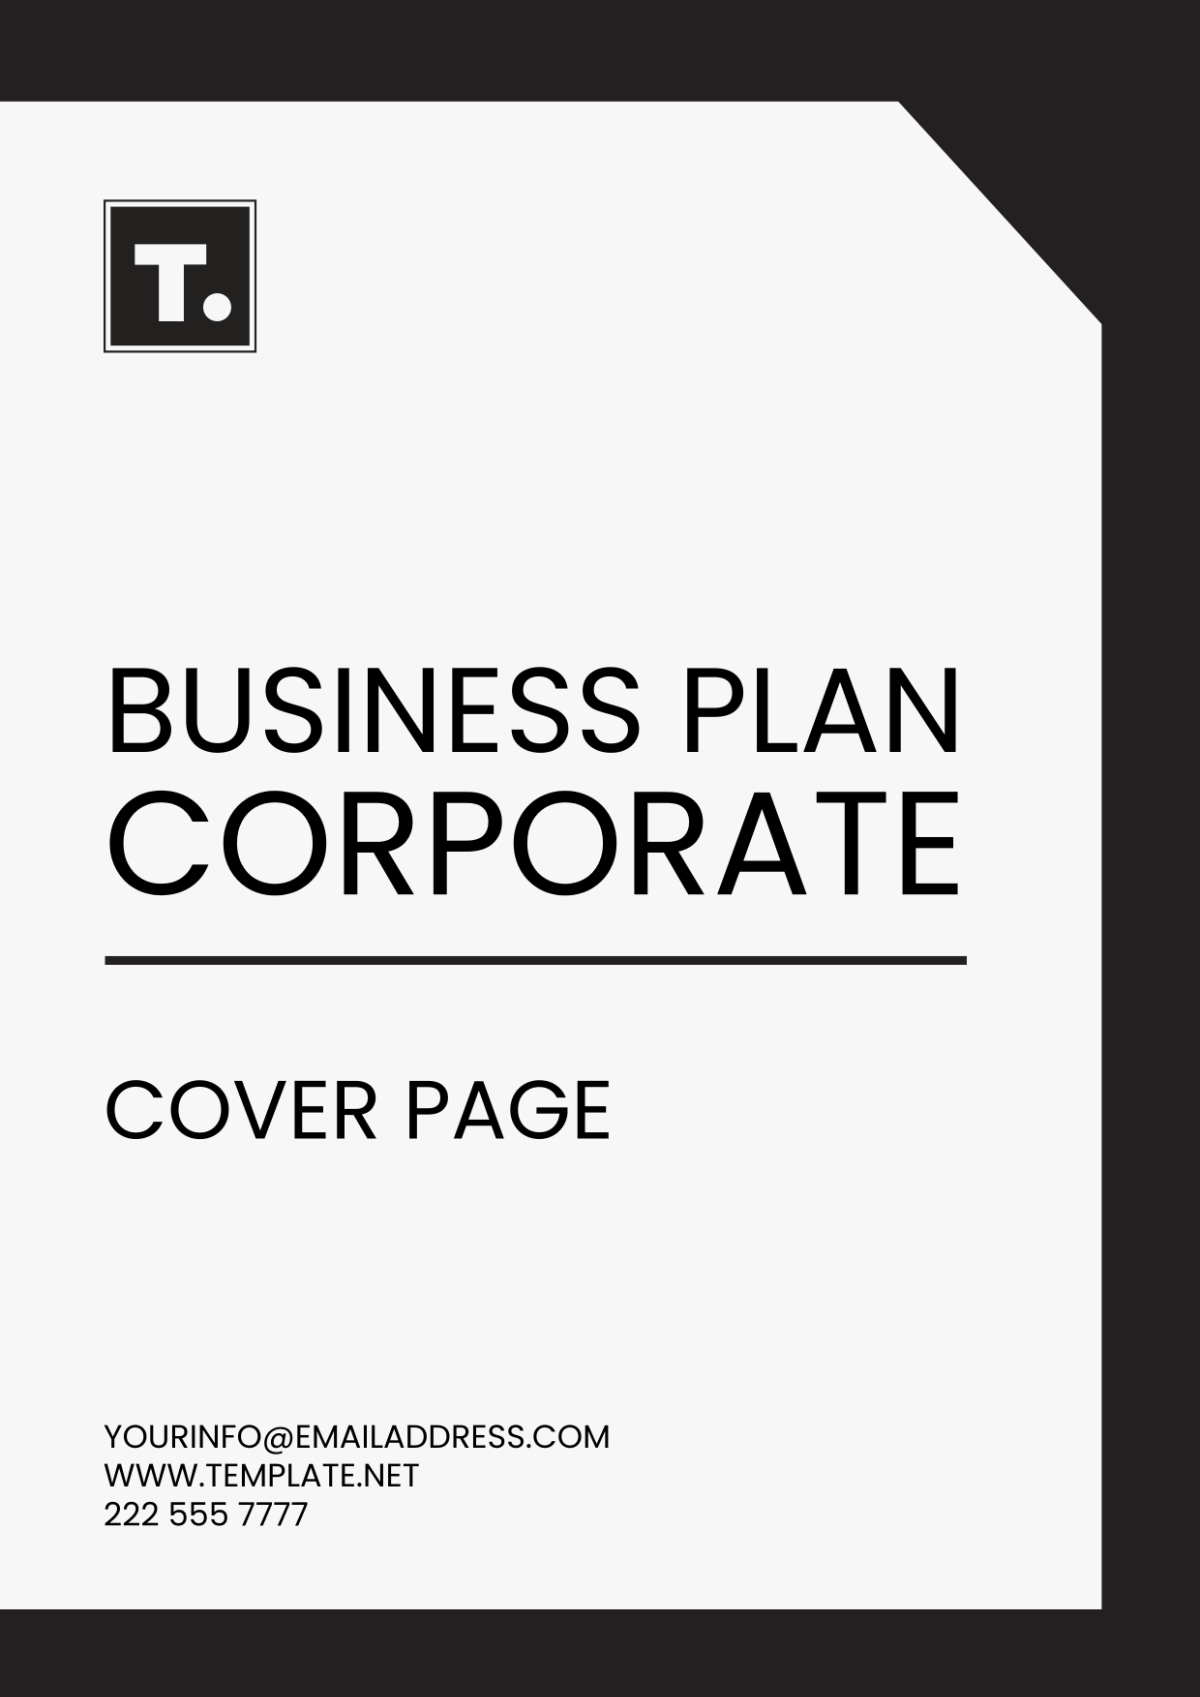 Business Plan Corporate Cover Page Template